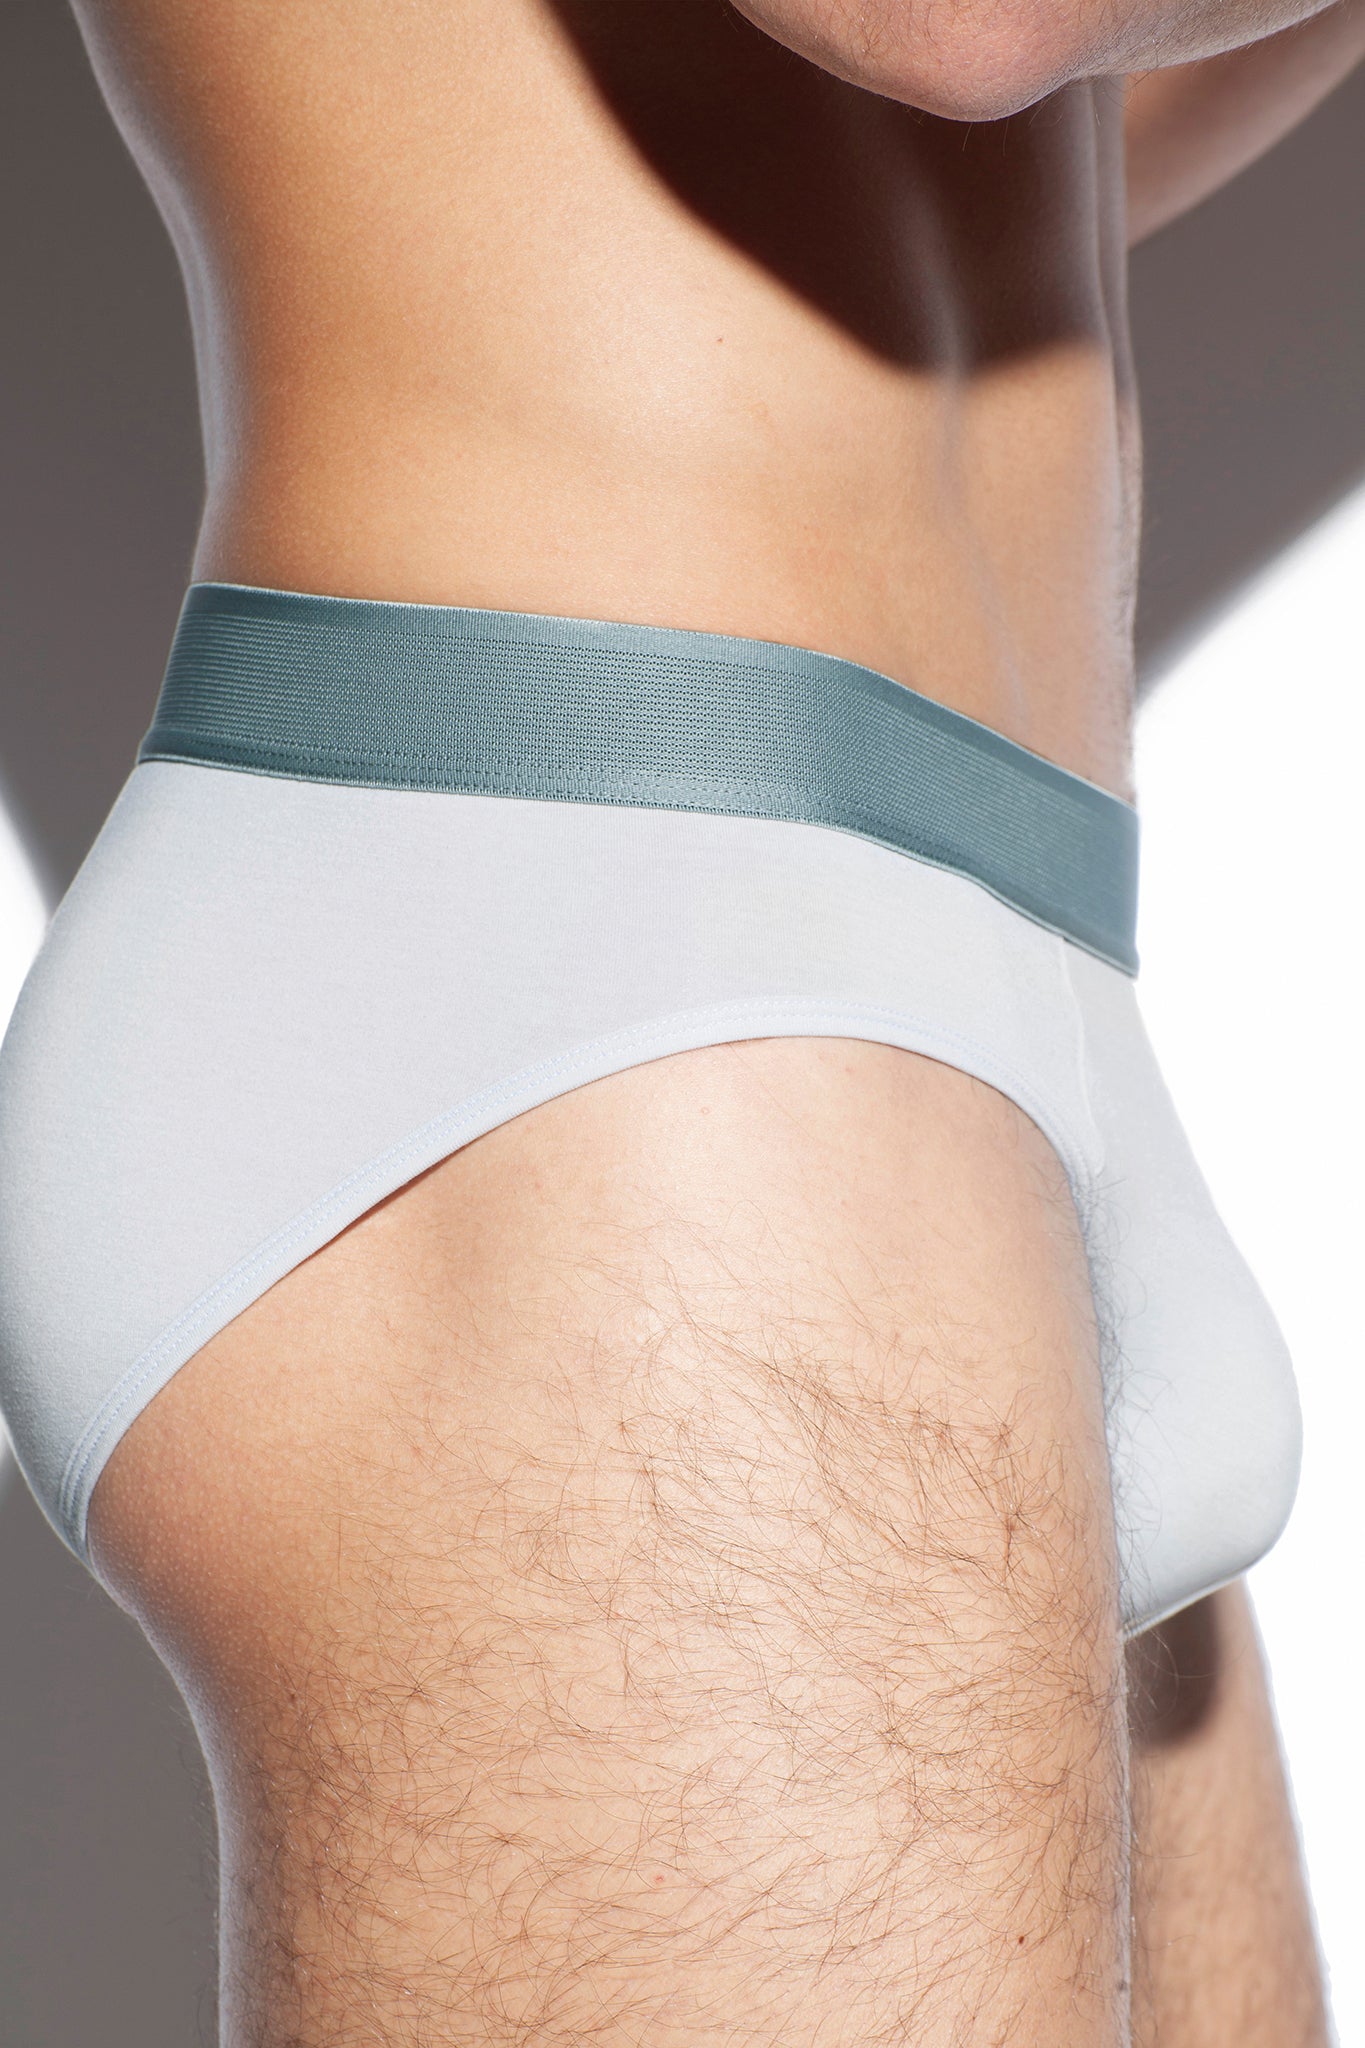 VIOLET GRAY SOOTHING SUMMER BRIEF